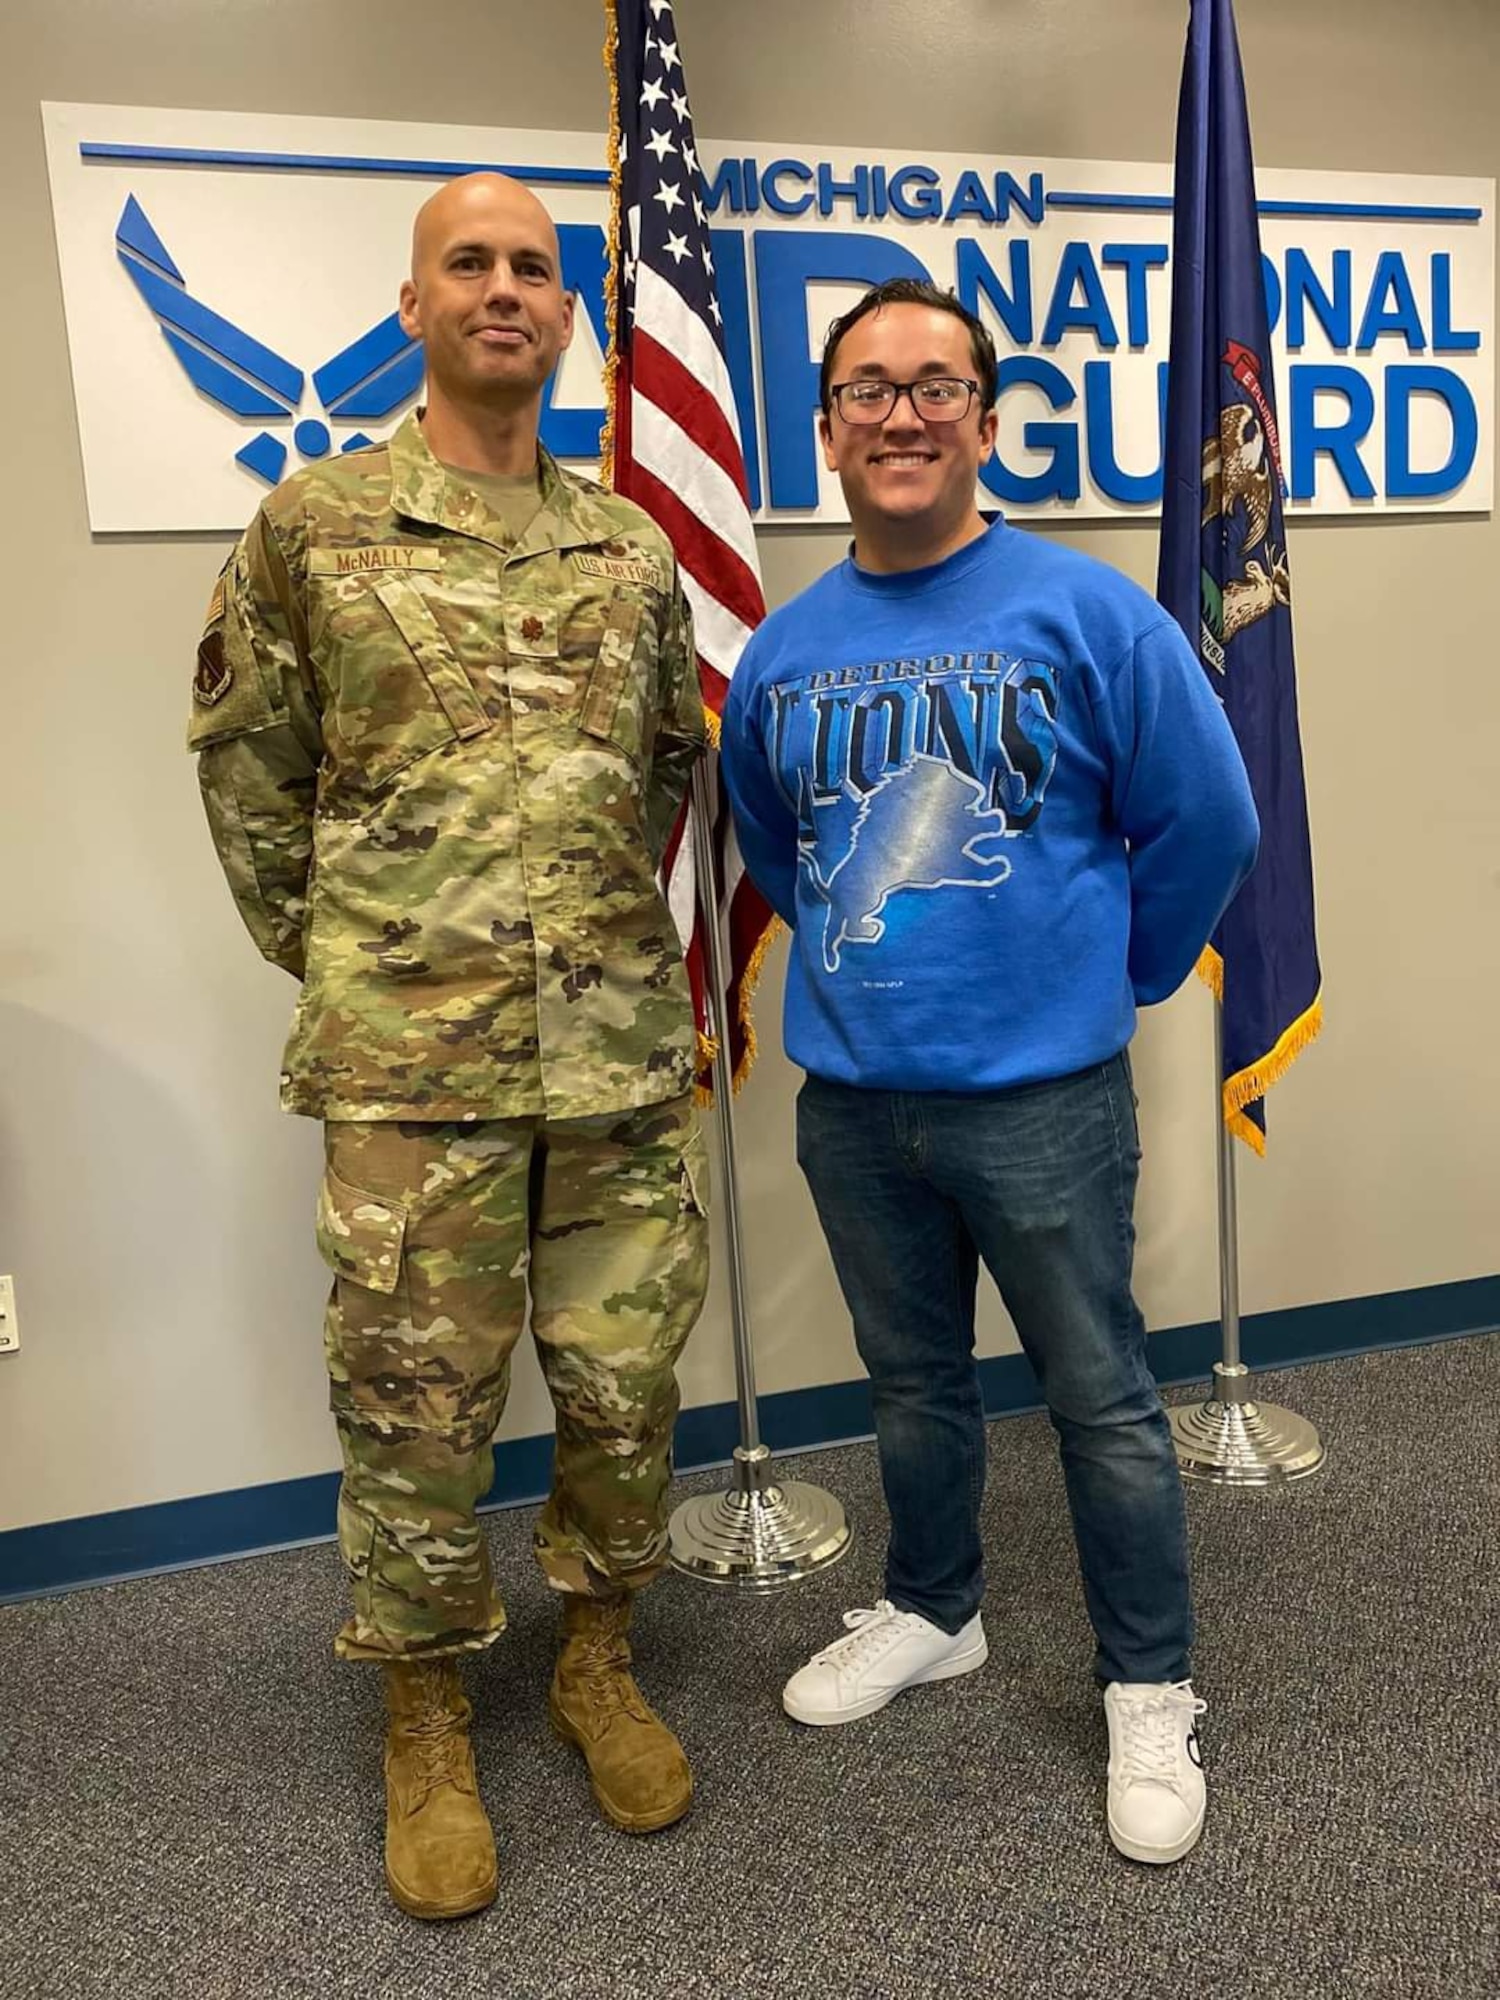 Uniformed Air Force captain poses with civilian in front of Air National Guard sign.